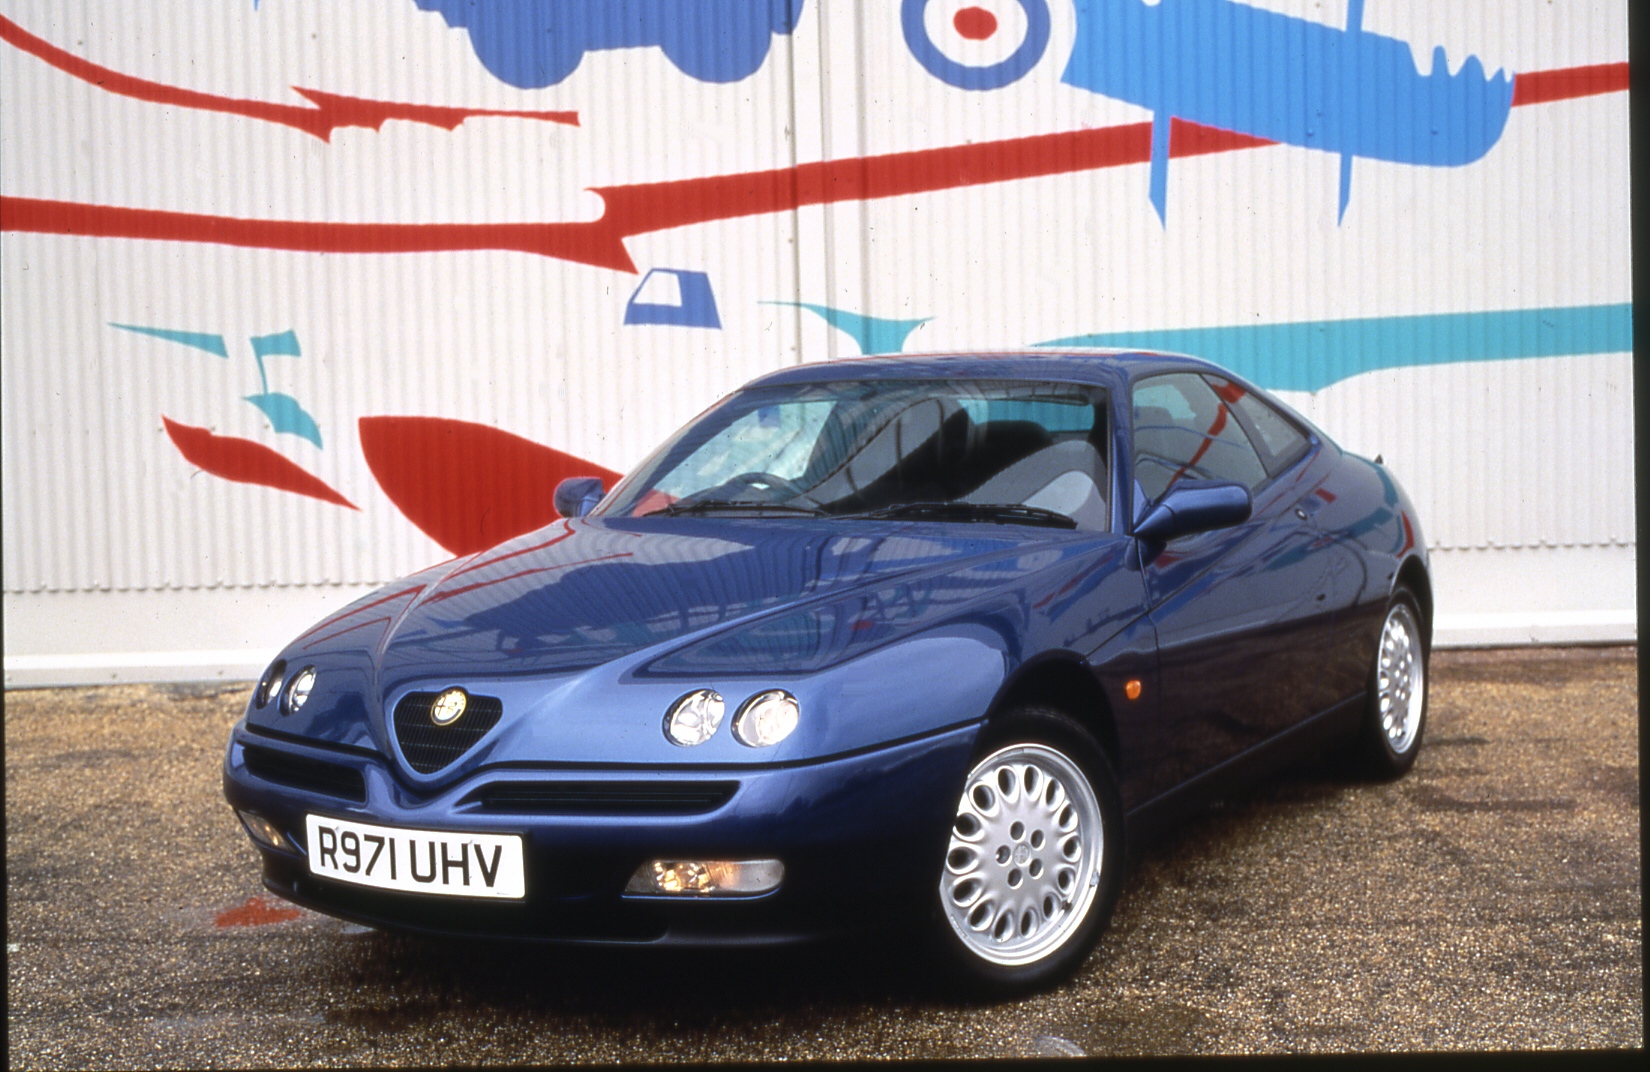 Alfa Romeo GTV looks great and costs little